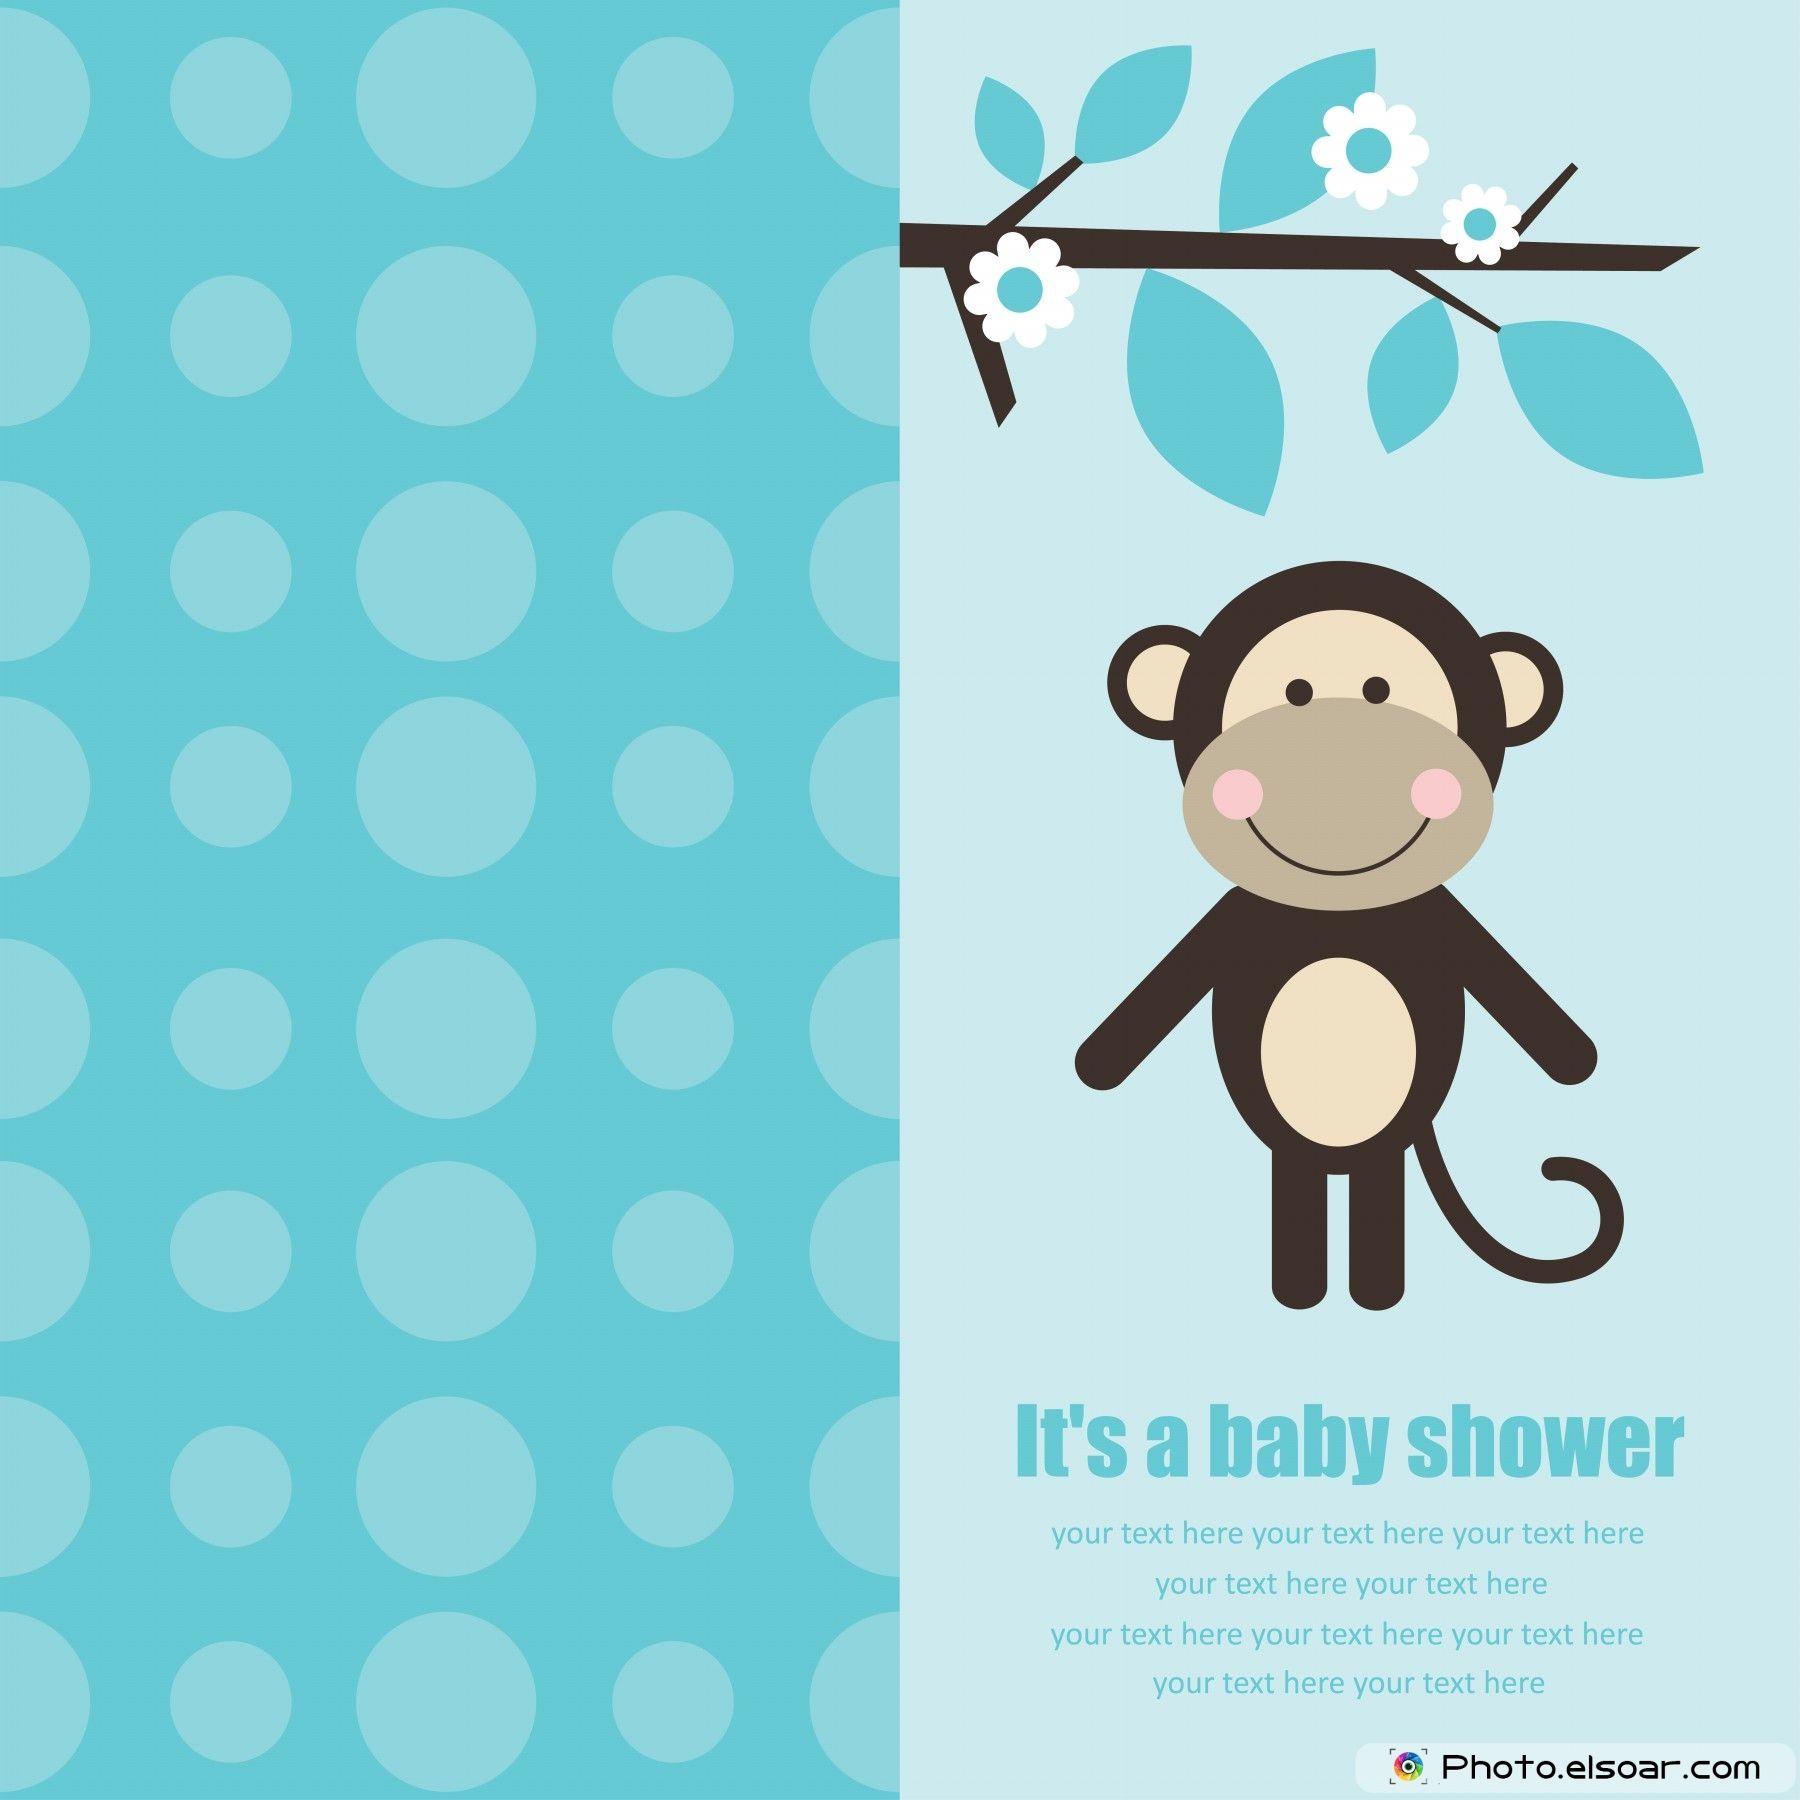 Baby Shower Wallpapers - Wallpaper Cave